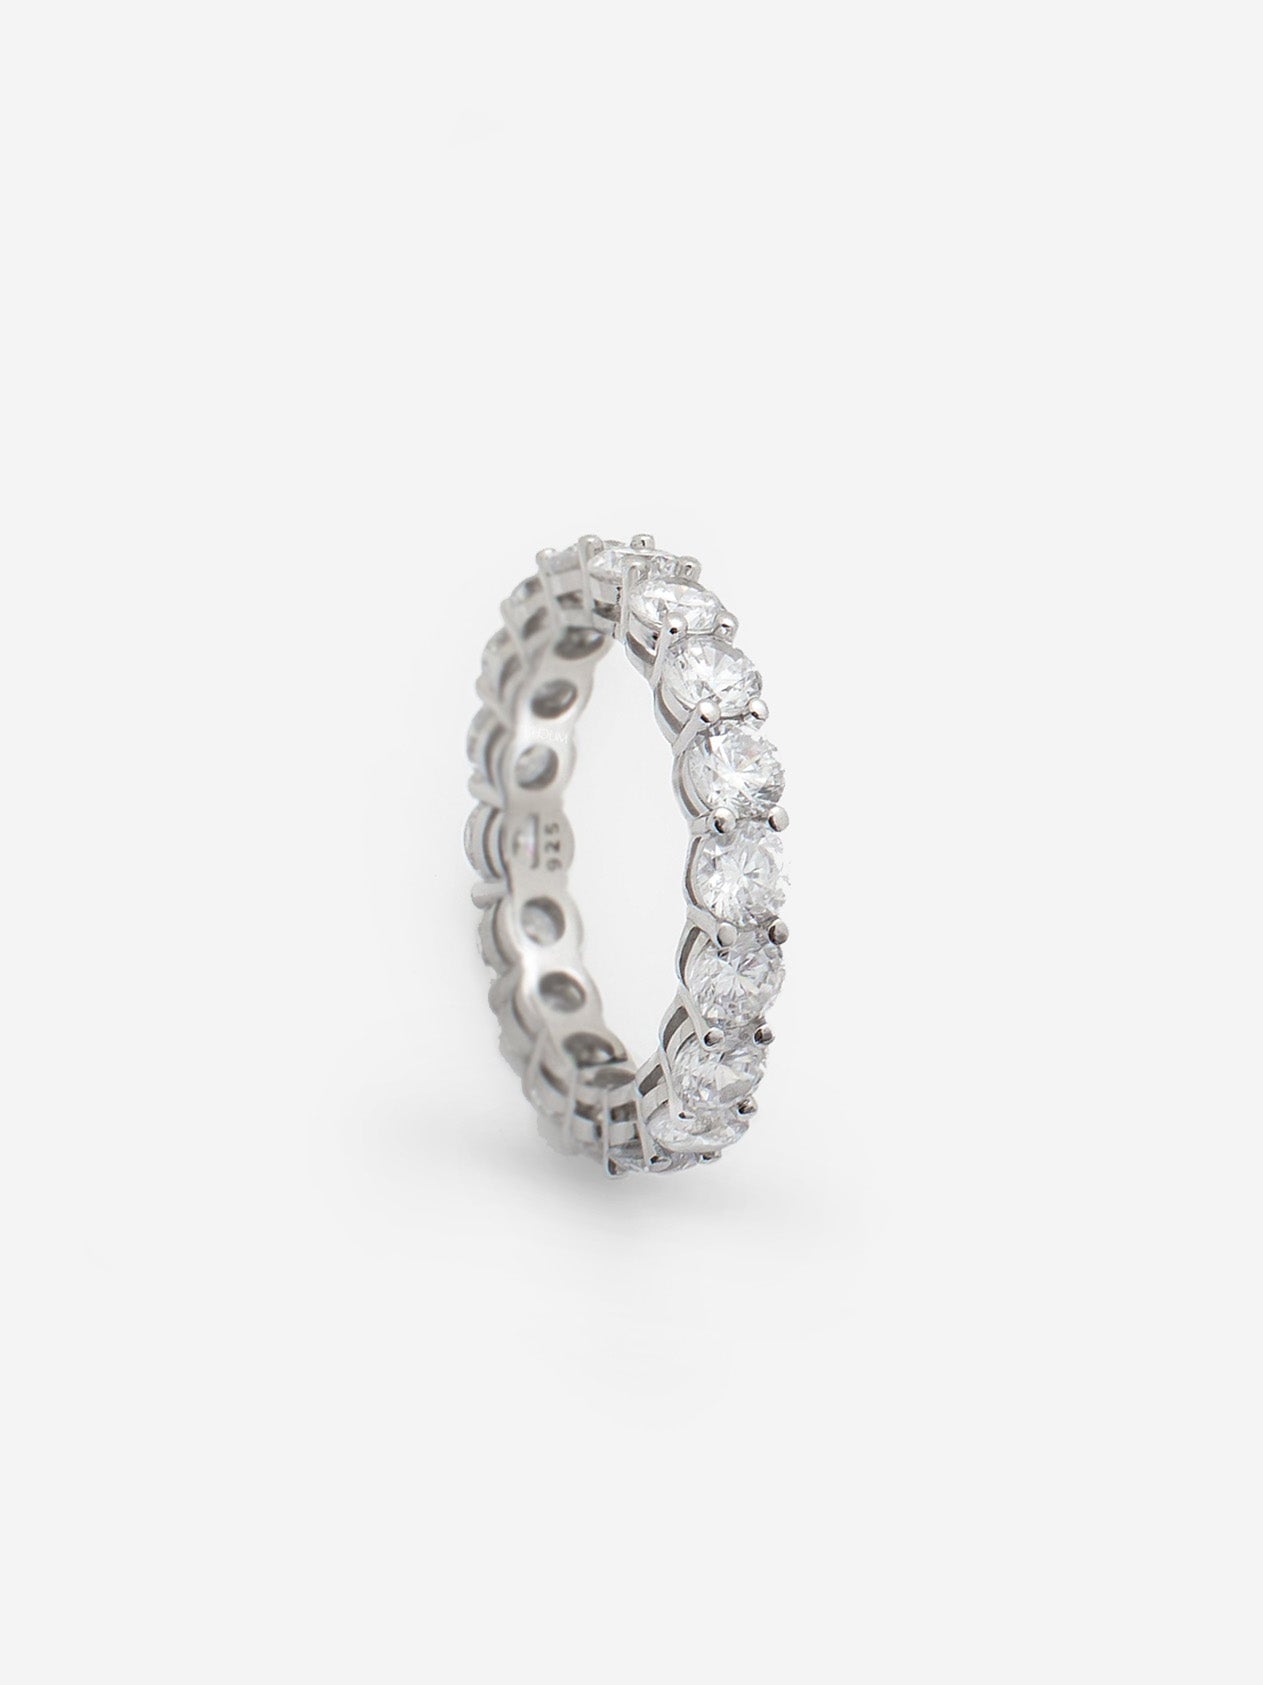 Stacking Ring With Round Cubic Zirconia Stones